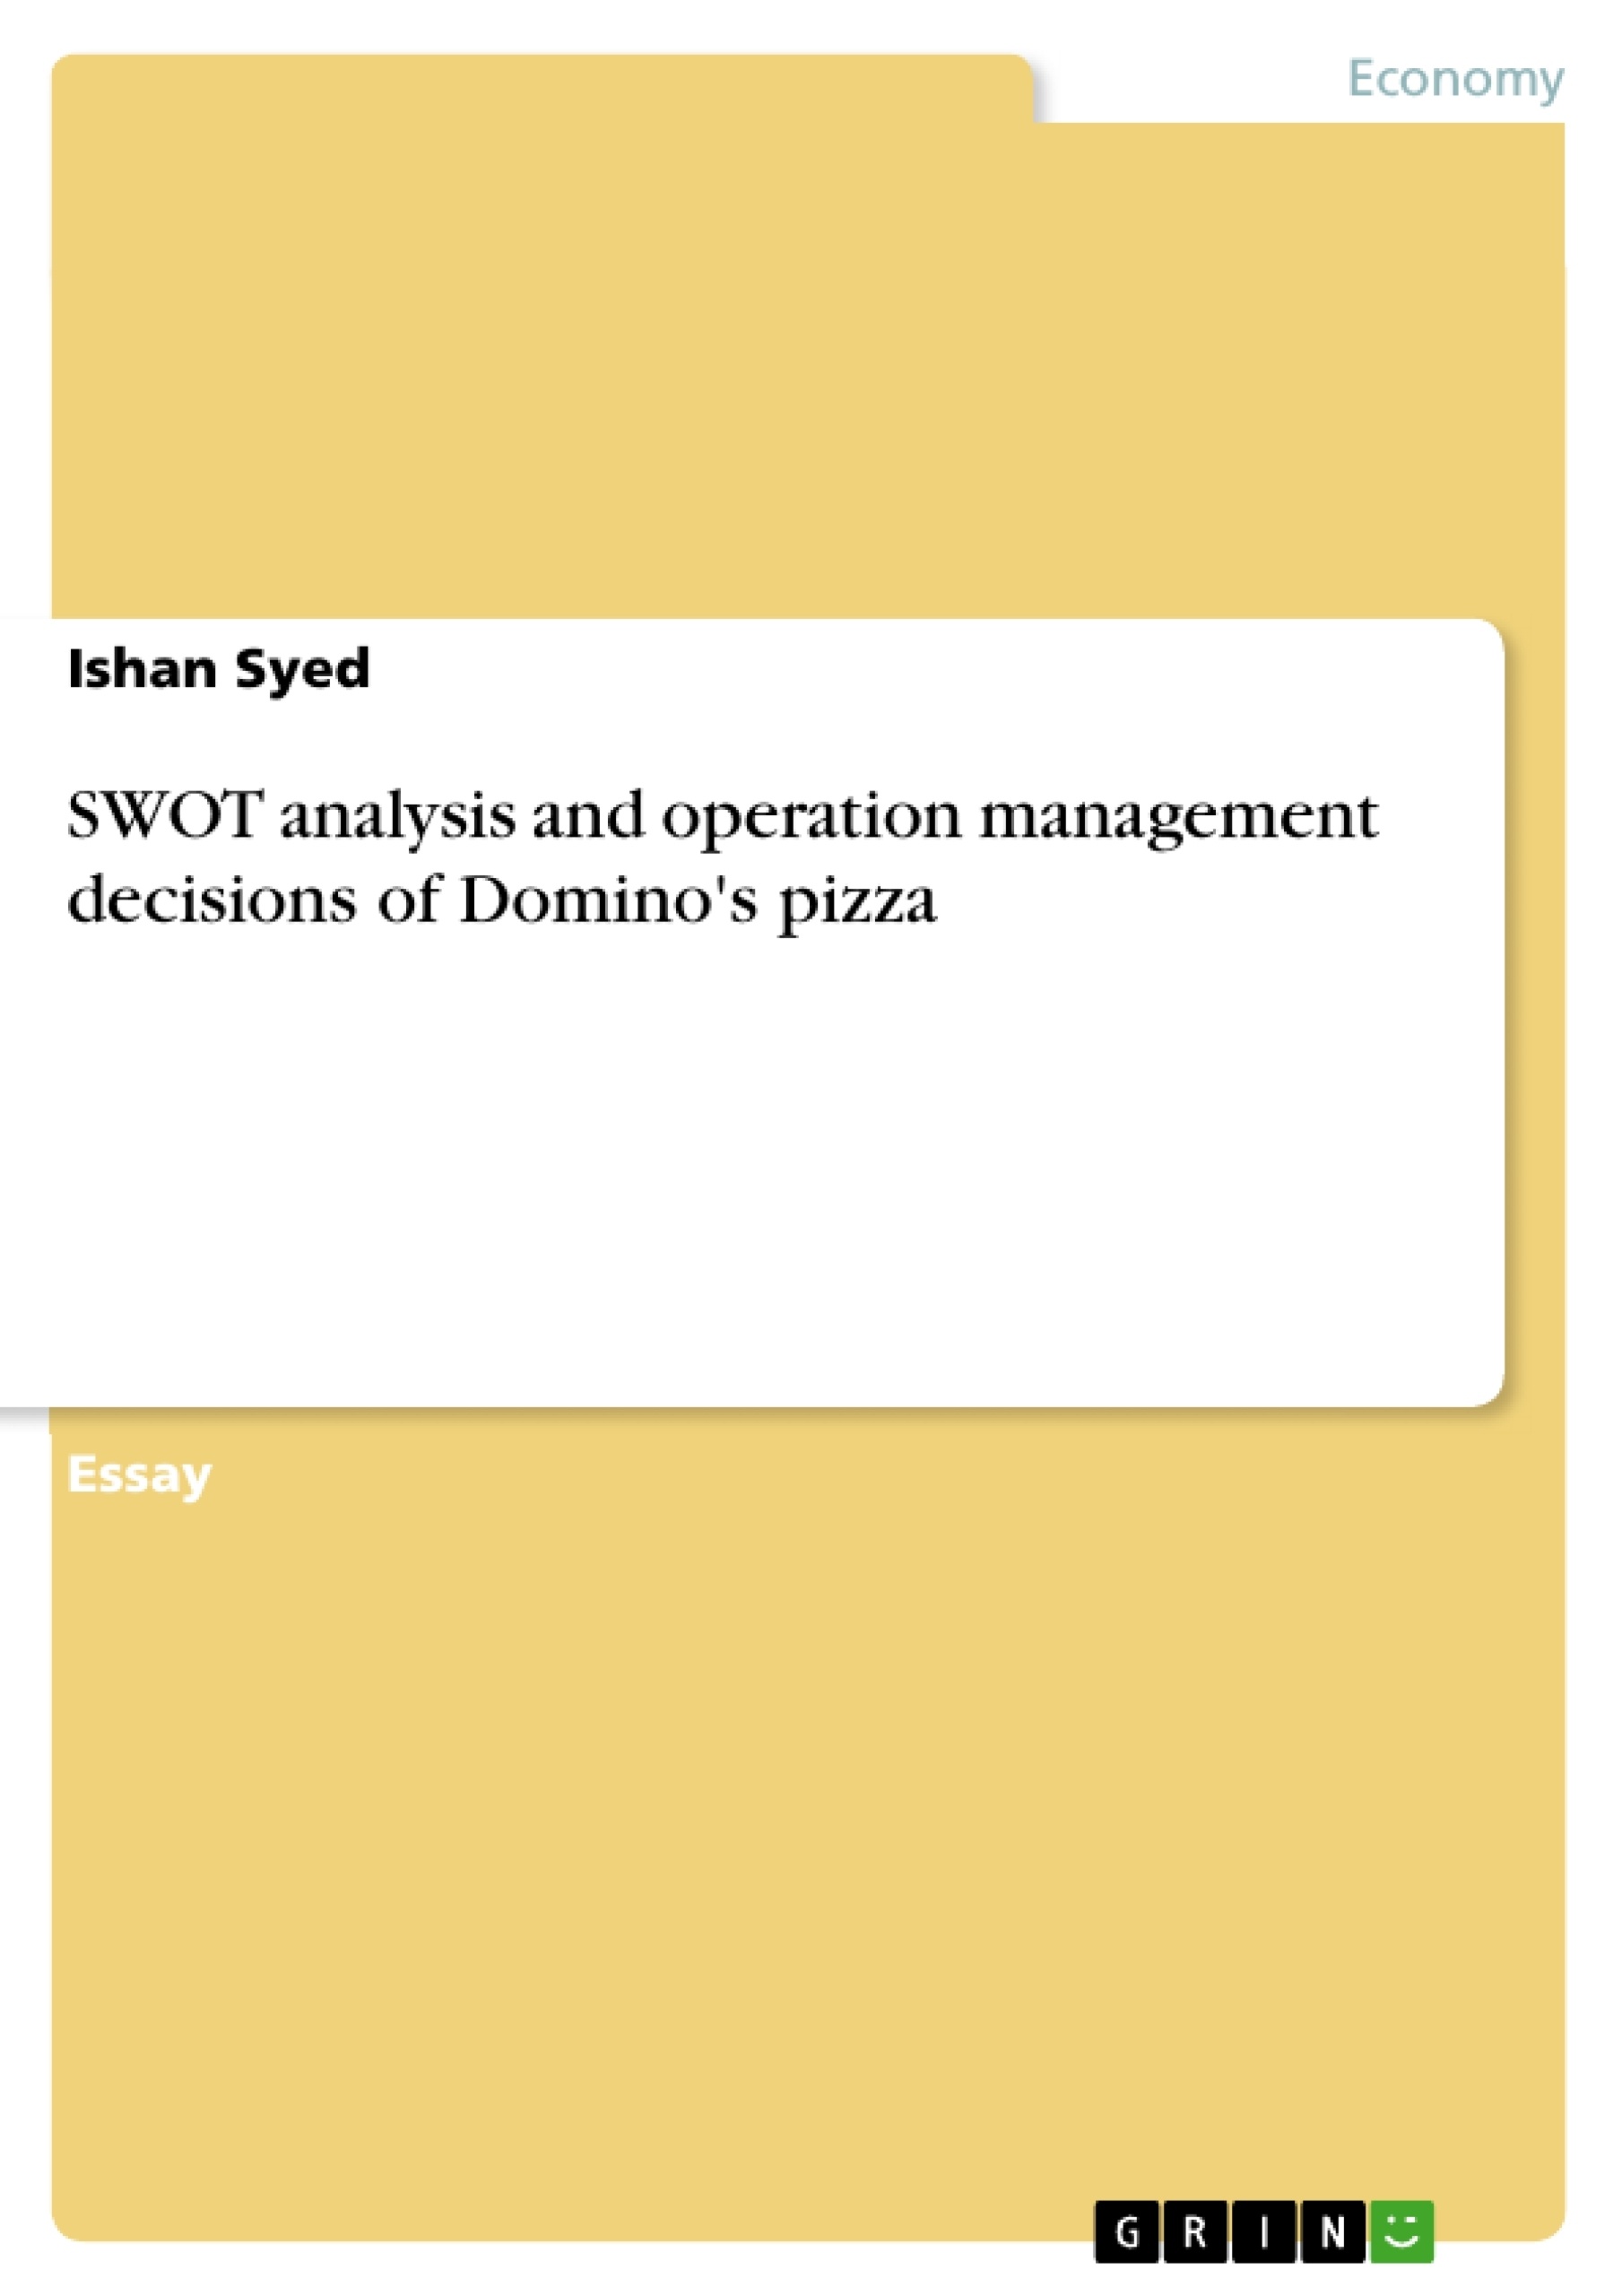 Title: SWOT analysis and operation management decisions of Domino's pizza